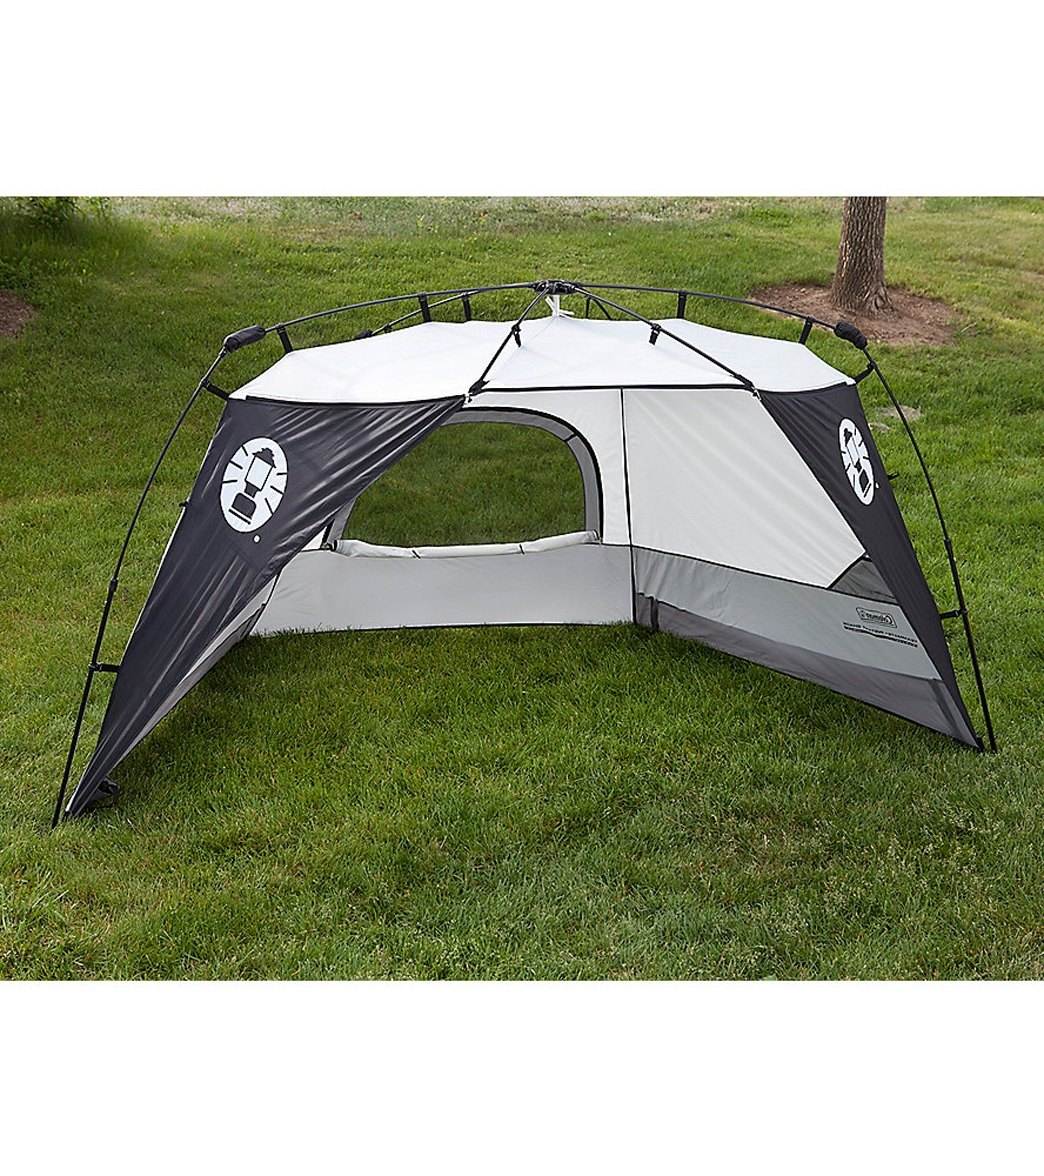 Coleman Instant Shade Teammate Shelter Beach Tent at SwimOutlet.com